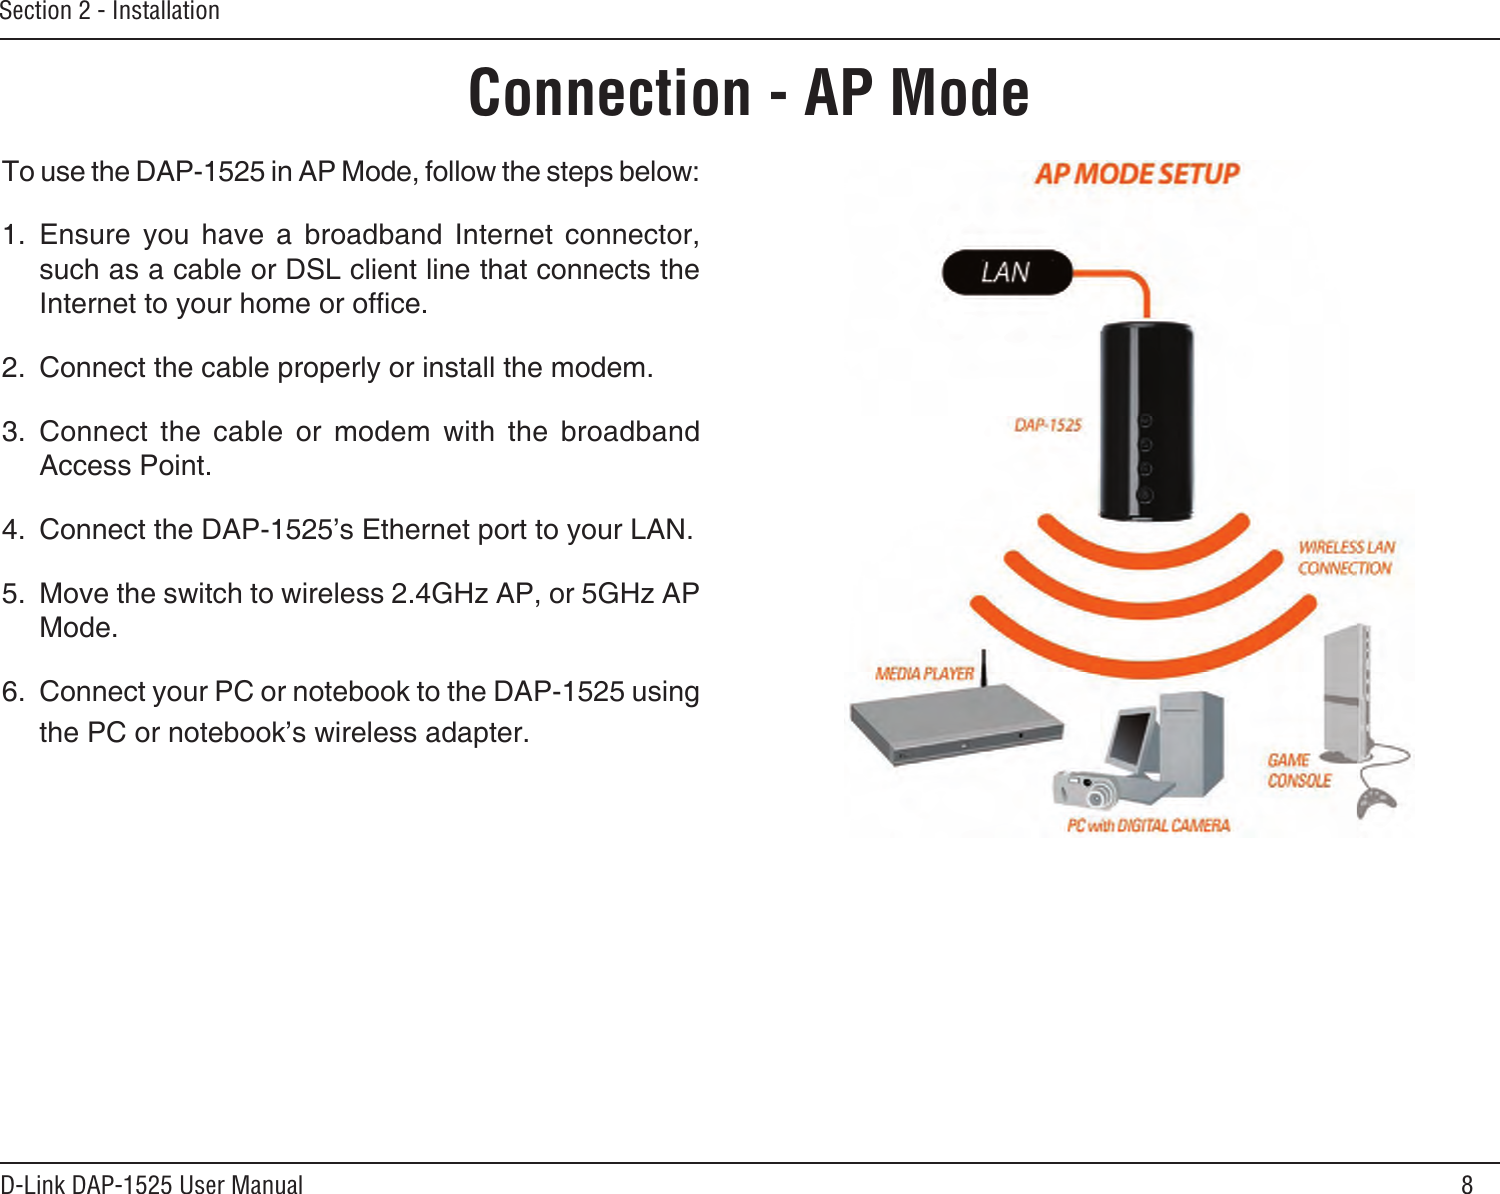 8D-Link DAP-1525 User ManualSection 2 - InstallationConnection - AP ModeTo use the DAP-1525 in AP Mode, follow the steps below:1.  Ensure  you  have  a  broadband  Internet  connector, such as a cable or DSL client line that connects the Internet to your home or ofce. 2.  Connect the cable properly or install the modem.3.  Connect  the  cable  or  modem  with  the  broadband Access Point.4.  Connect the DAP-1525’s Ethernet port to your LAN. 5.  Move the switch to wireless 2.4GHz AP, or 5GHz AP Mode. 6.  Connect your PC or notebook to the DAP-1525 using the PC or notebook’s wireless adapter. 